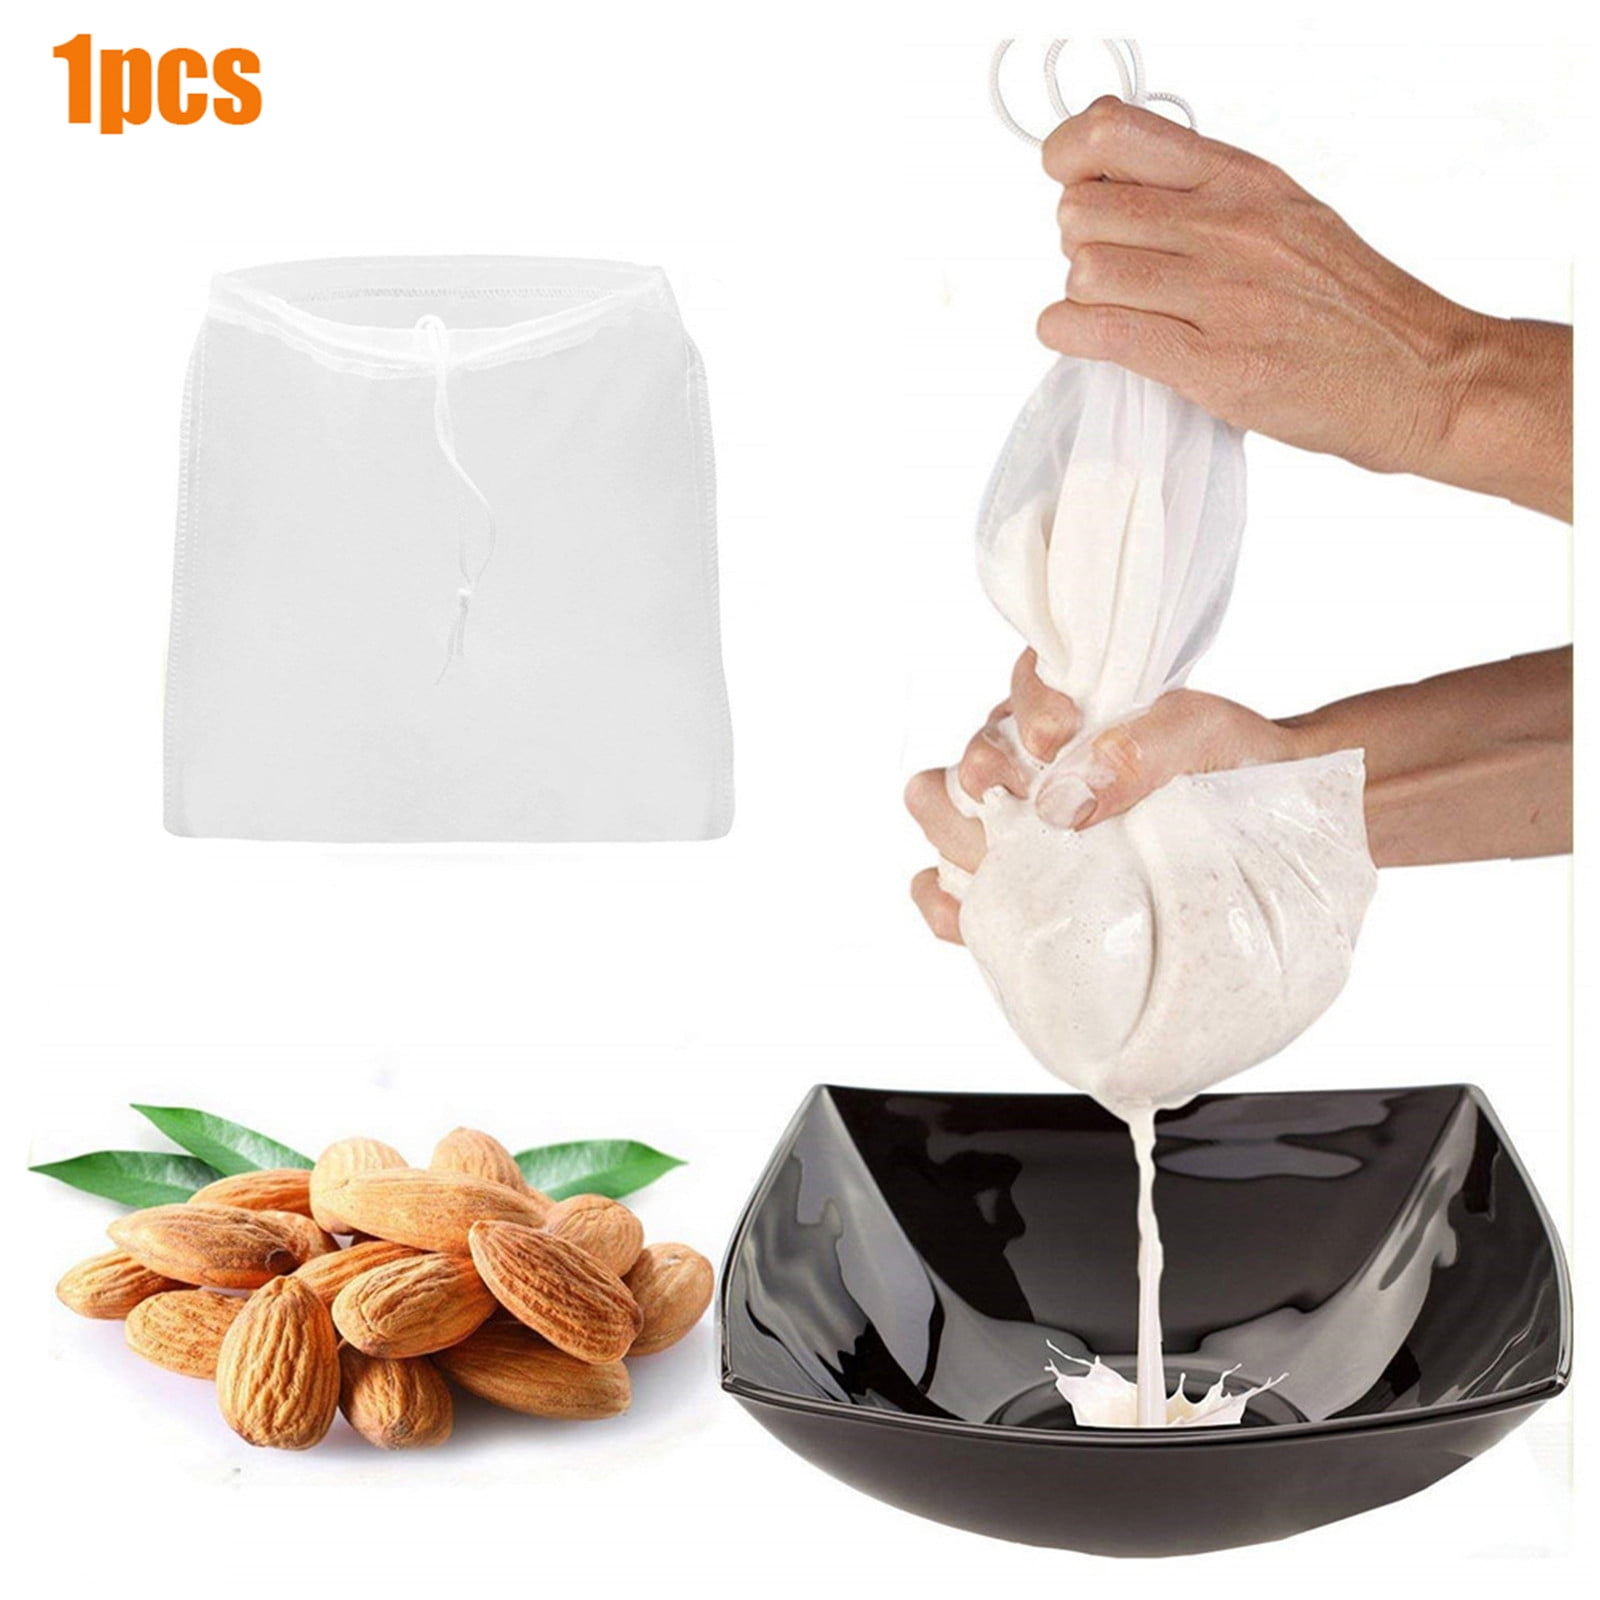 1Pcs Reusable Fine Mesh Cotton Nut Milk/Cheese Cloth Bag/Cold Brew Coffee Filter